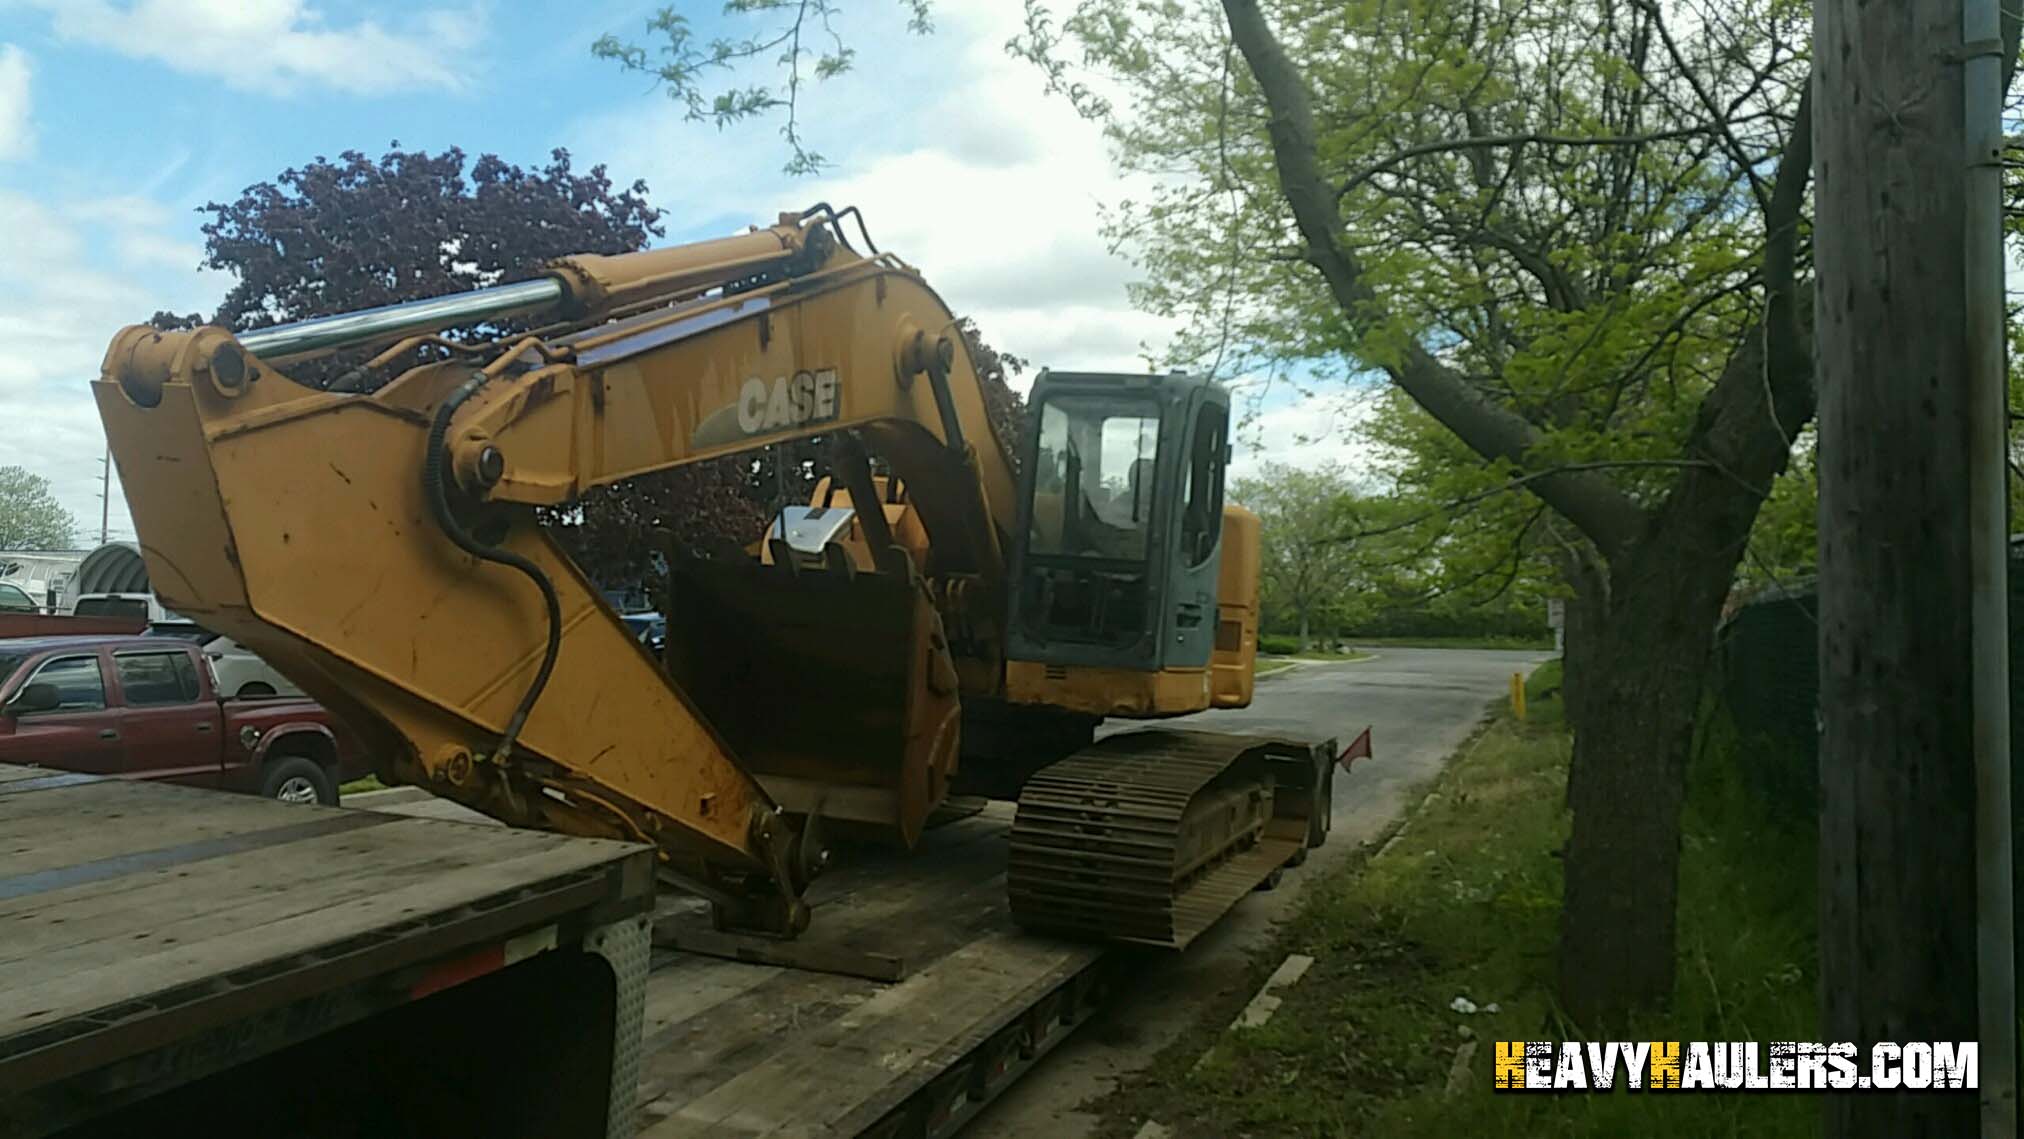 Transporting a Case hydraulic excavator in Maryland.